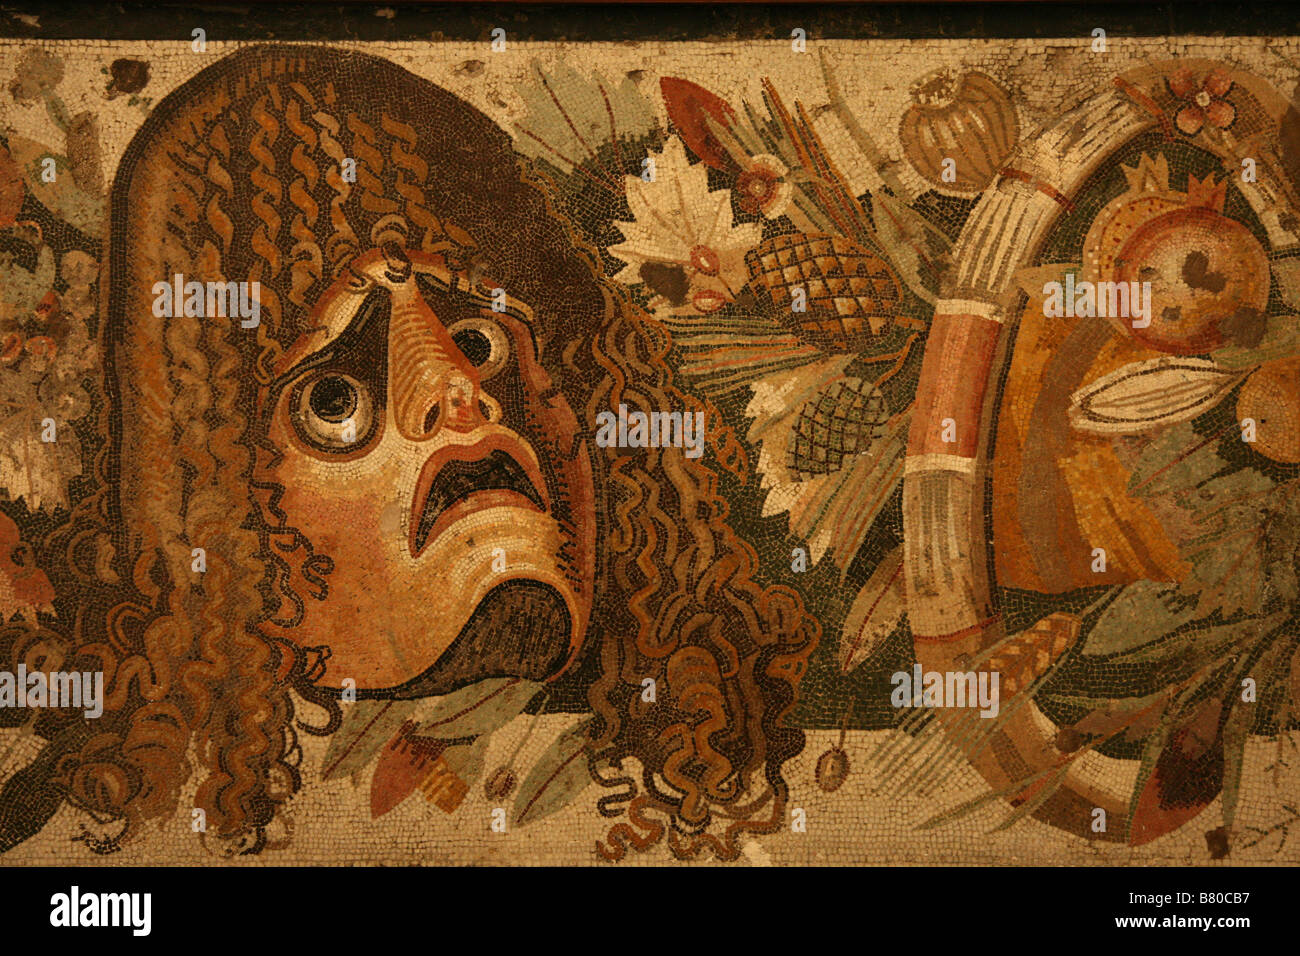 Tragic Mask. Mosaic from the House of the Faun from Pompeii in the National Archaeological Museum in Naples, Italy. Stock Photo